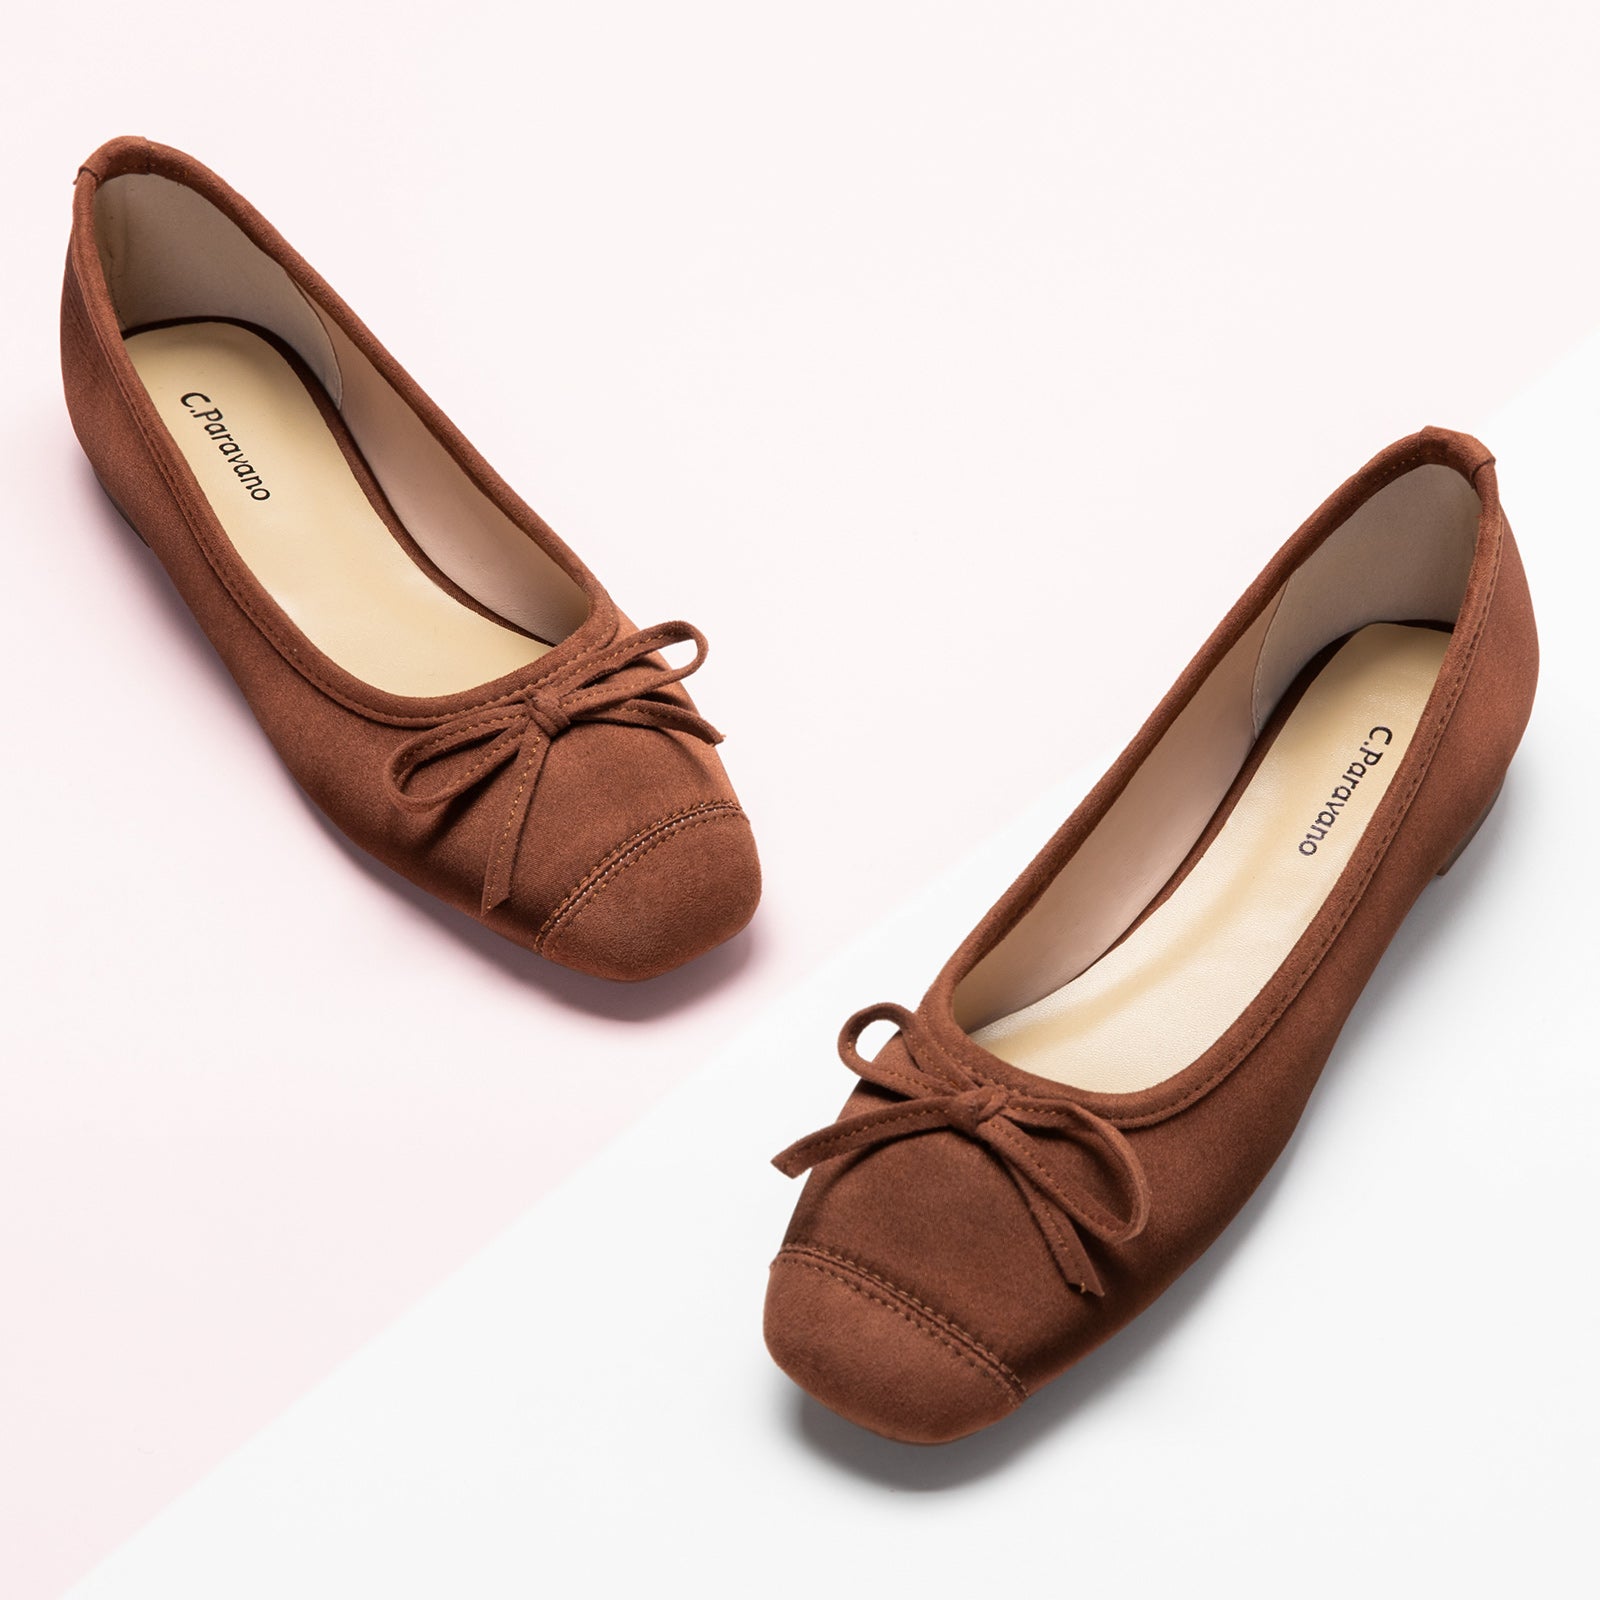 ilky Bowknot Ballet Flats in Brown, featuring a timeless design for a refined and understated look